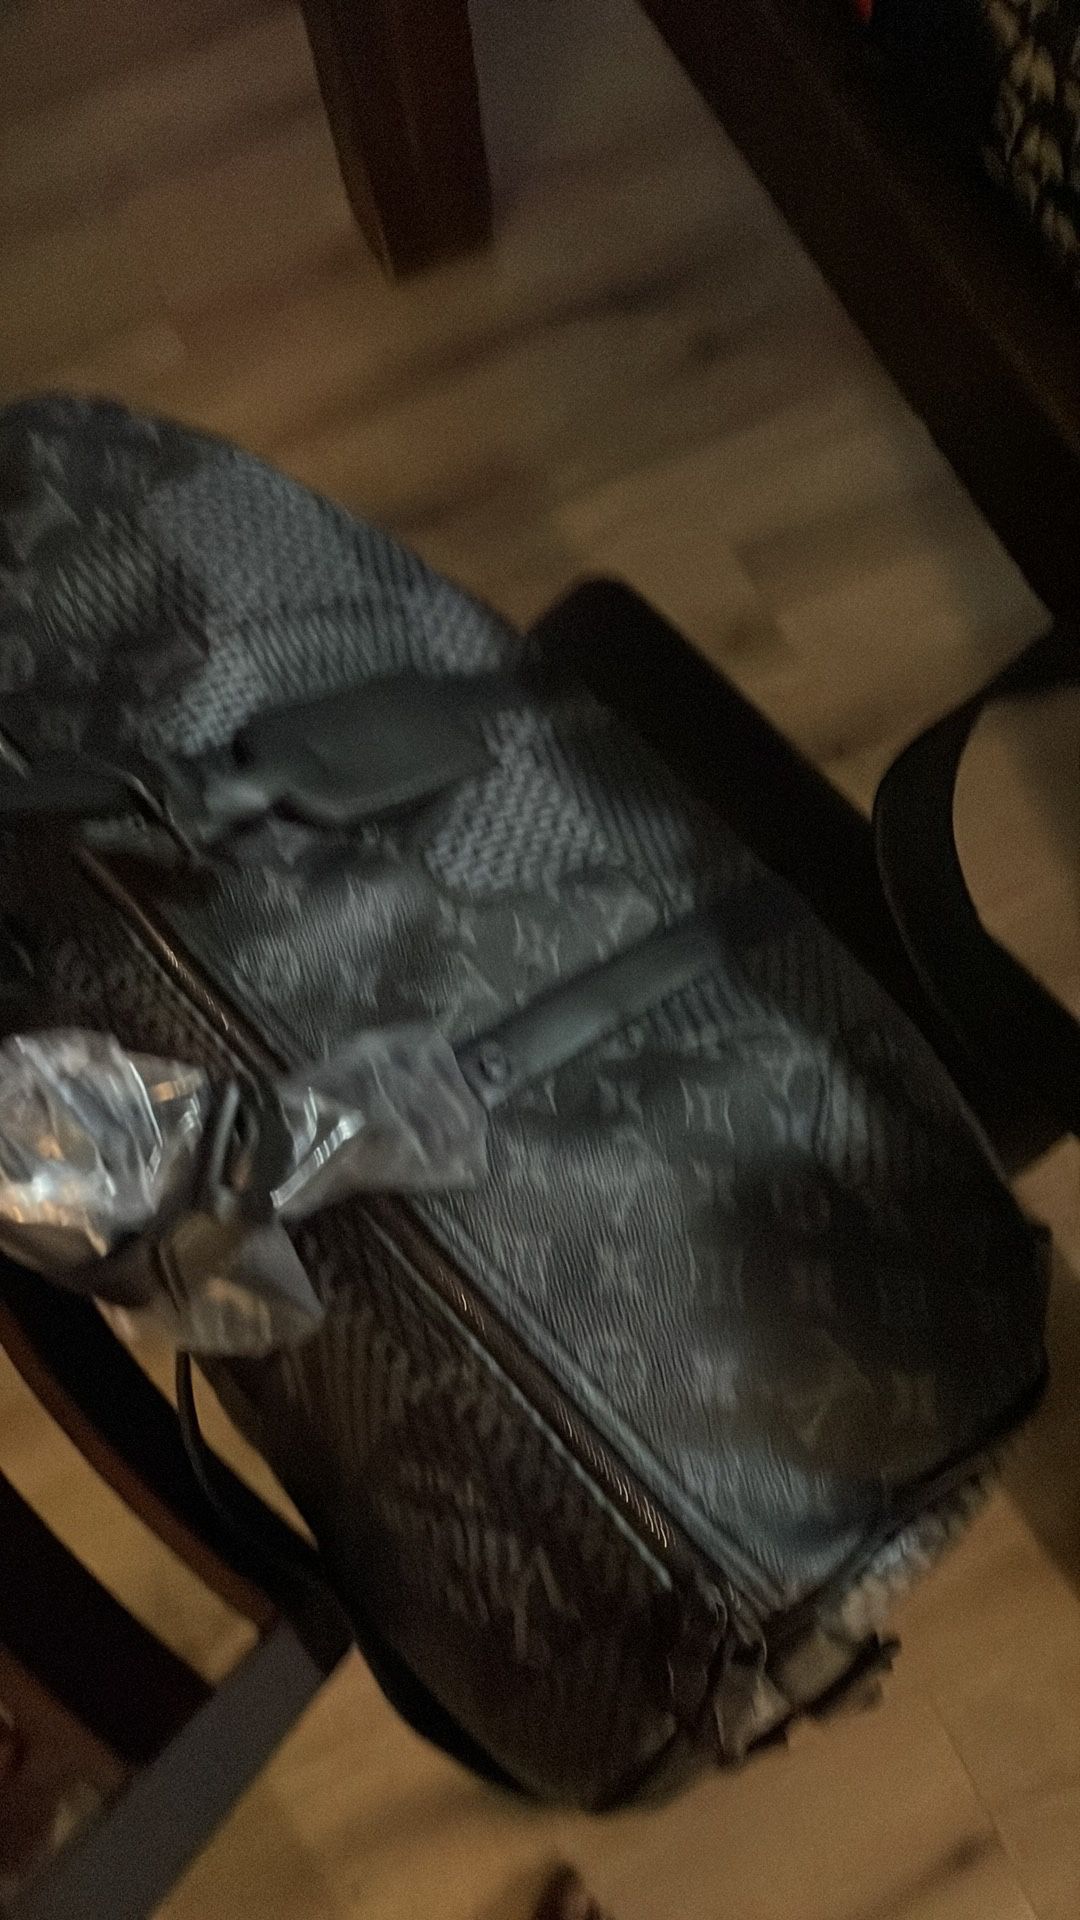 Used LOUIS VUITTON Duffle Bag for Sale in Mesa, AZ - OfferUp